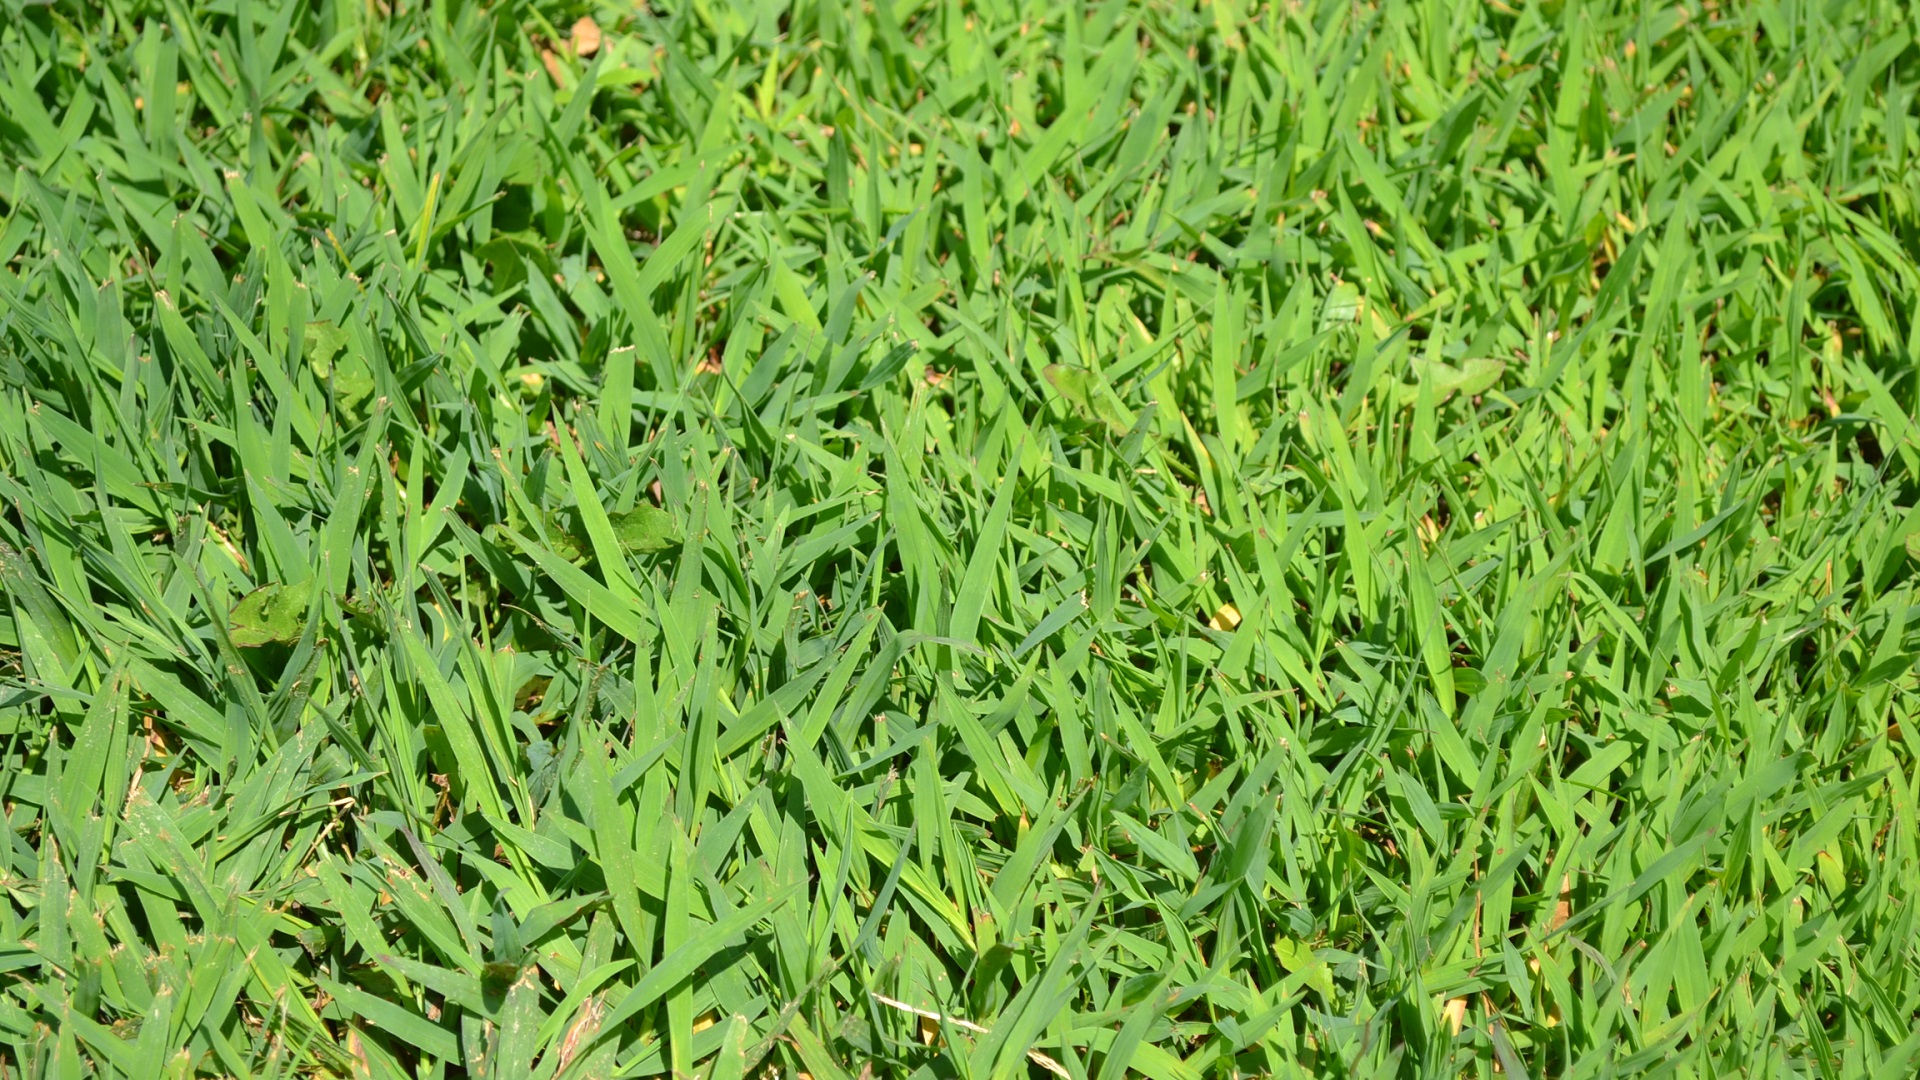 How Get Rid Of Crabgrass Without Damaging Your Lawn